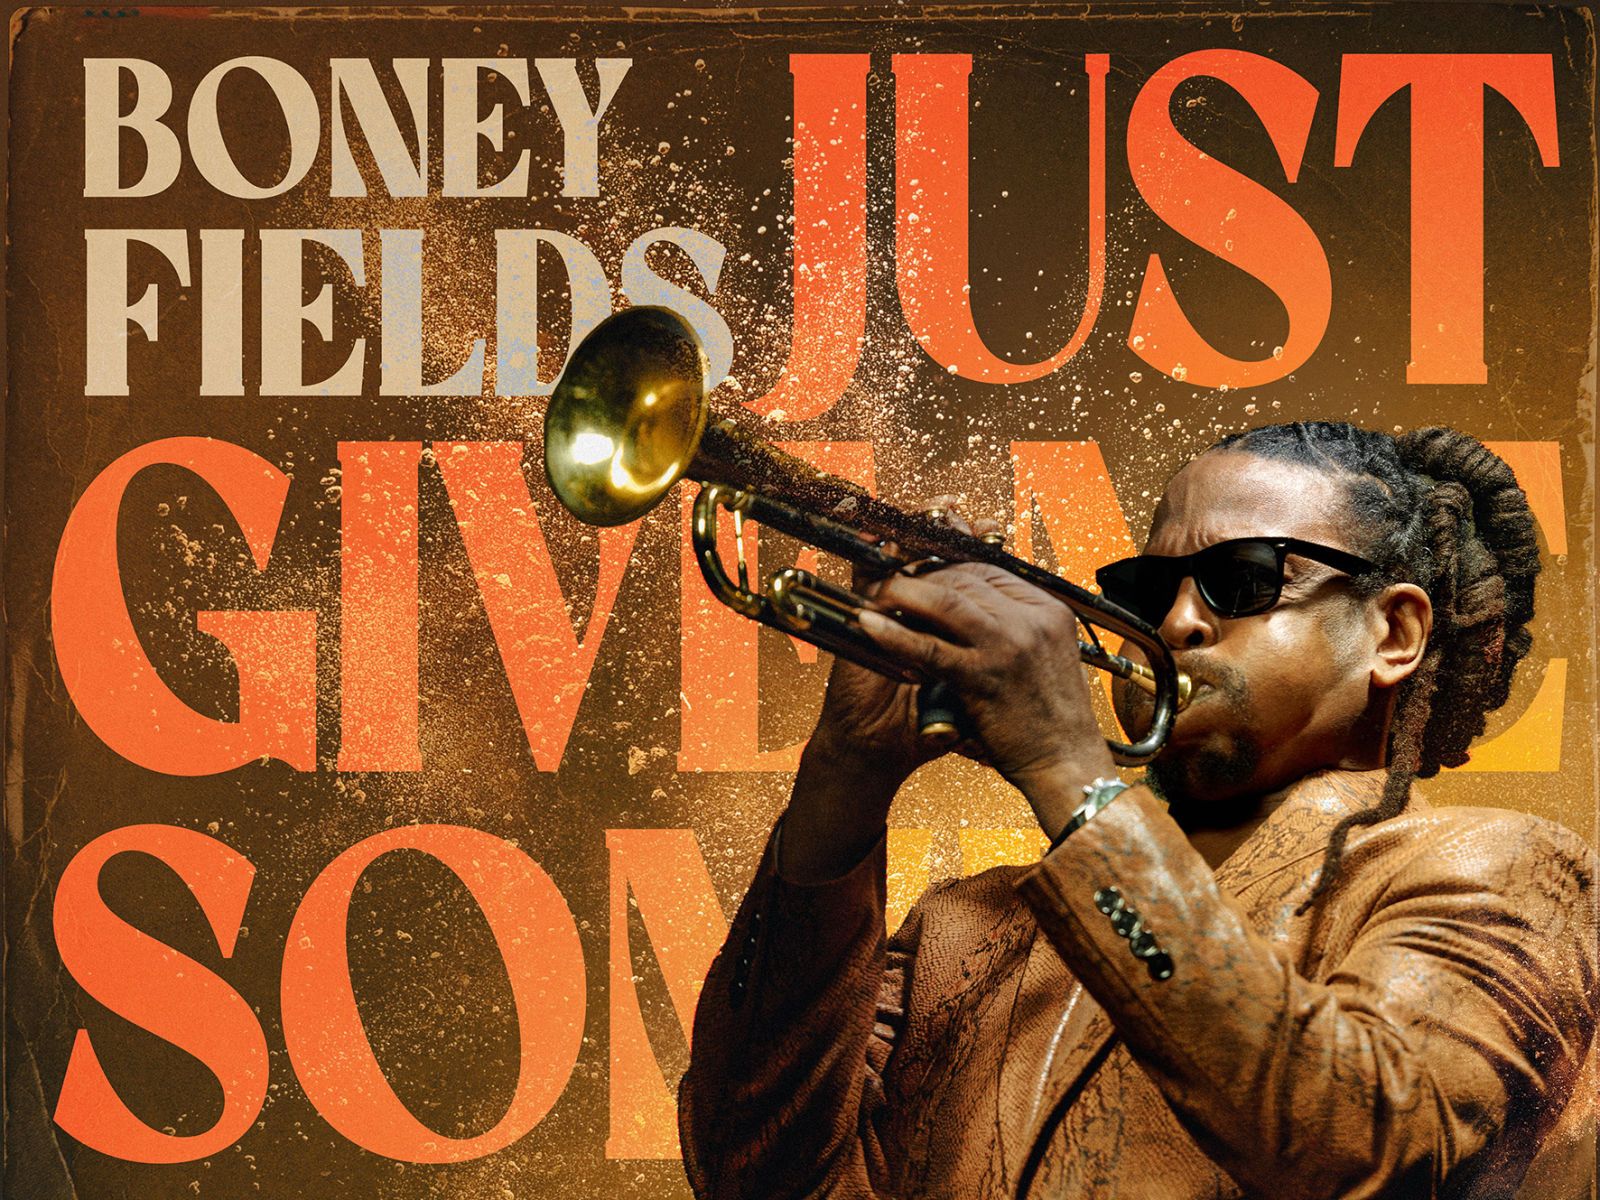 BONEY FIELDS – JUST GIVE ME SOME MO’ - Rootstime Magazine Review